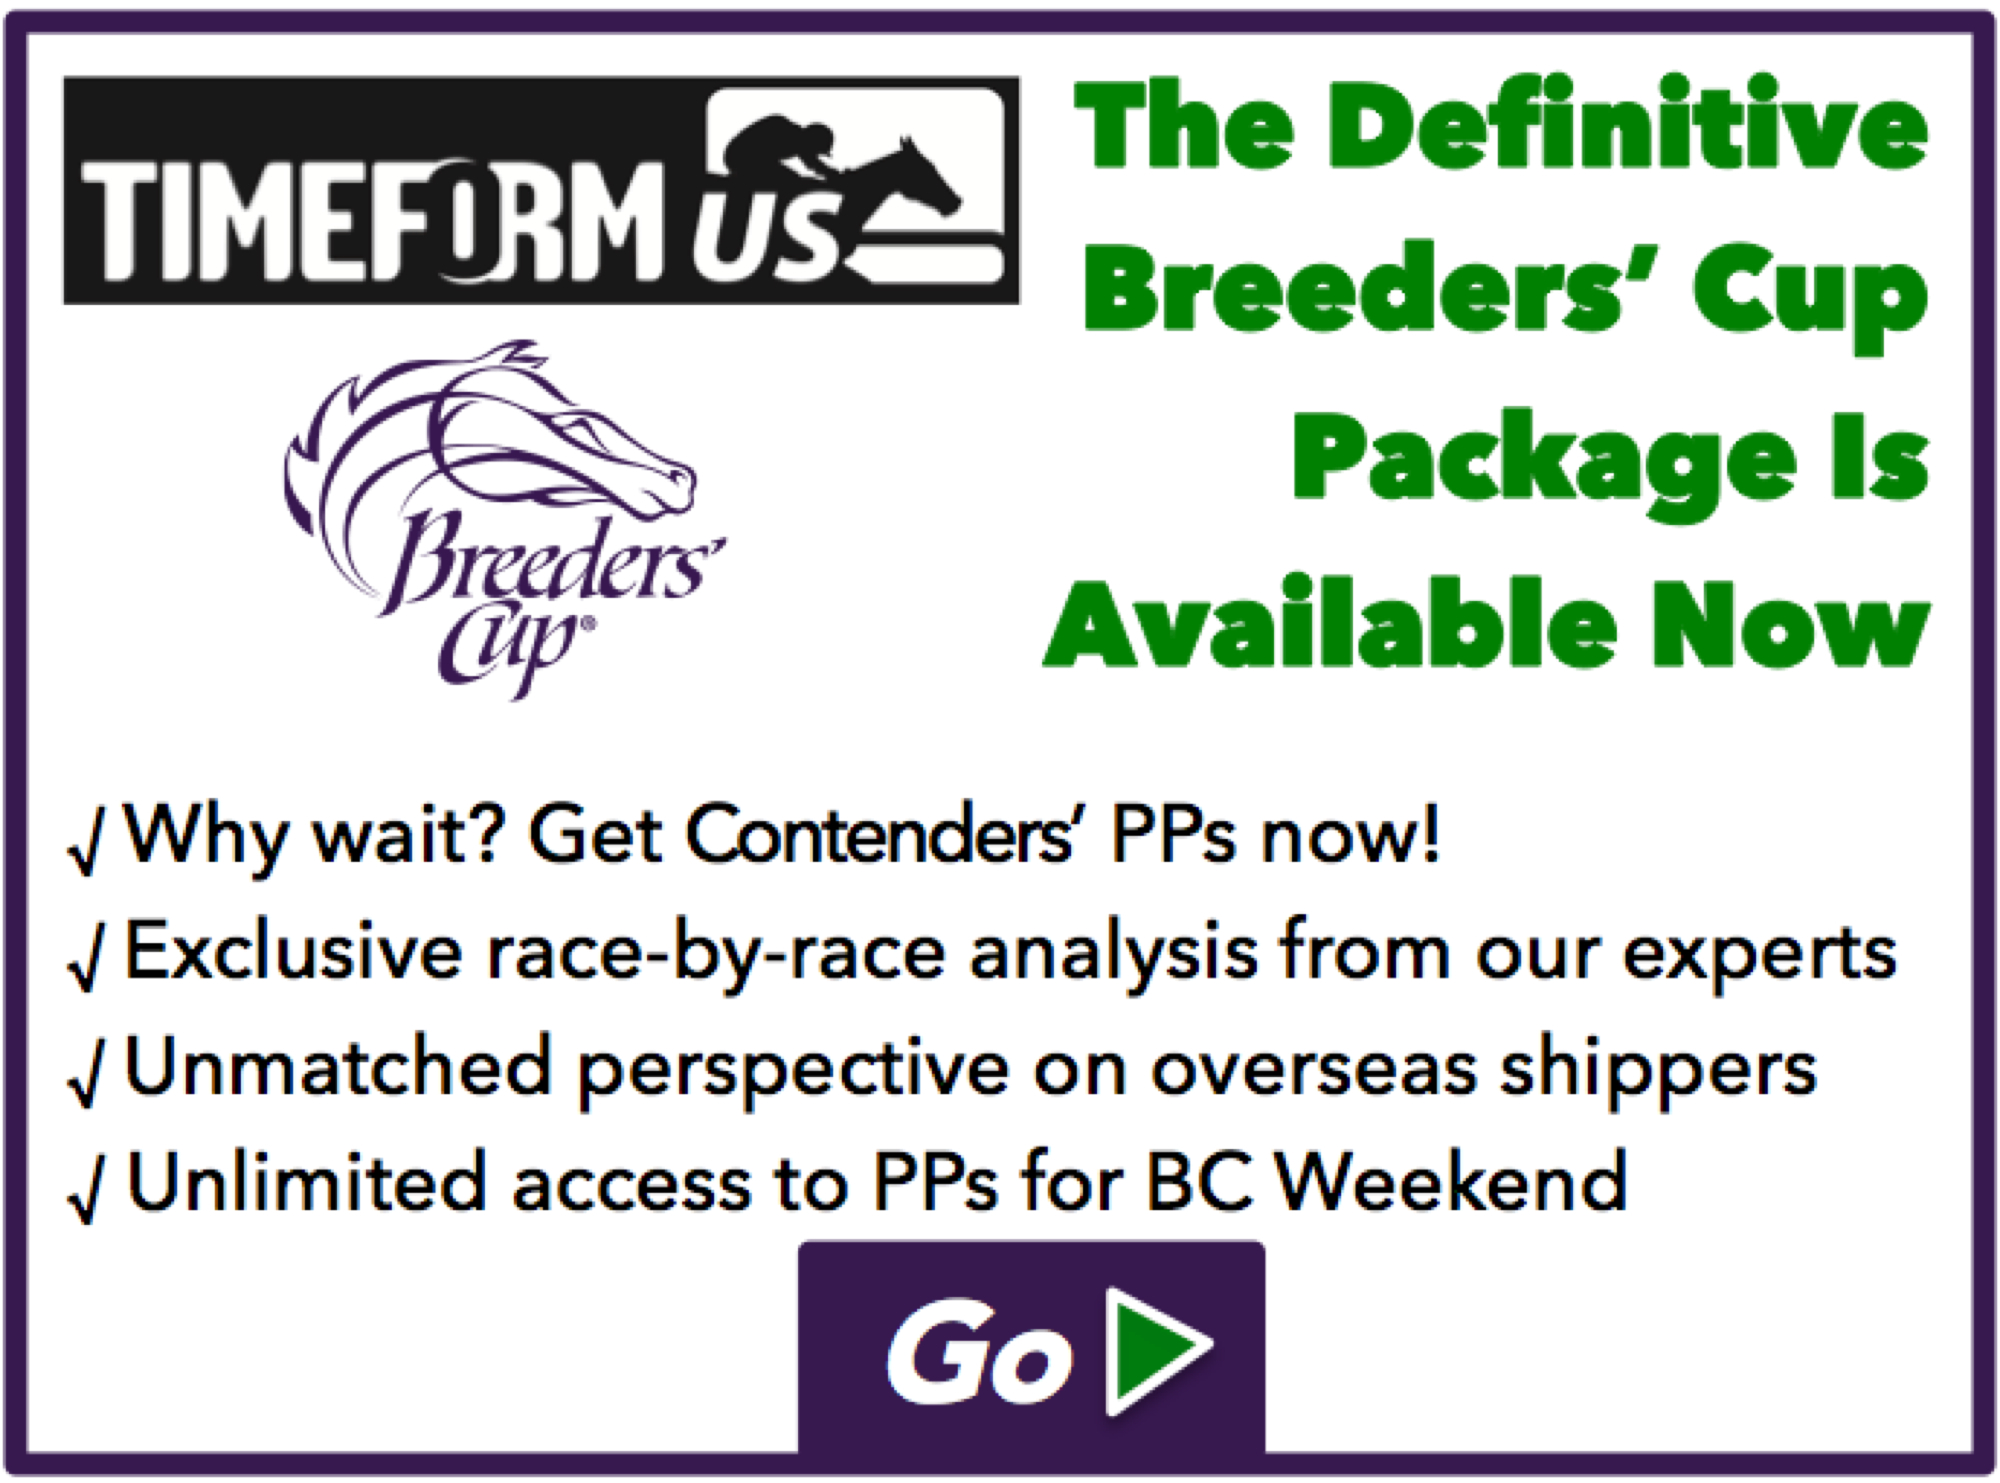 TimeformUS Breeders' Cup Advance is ready!